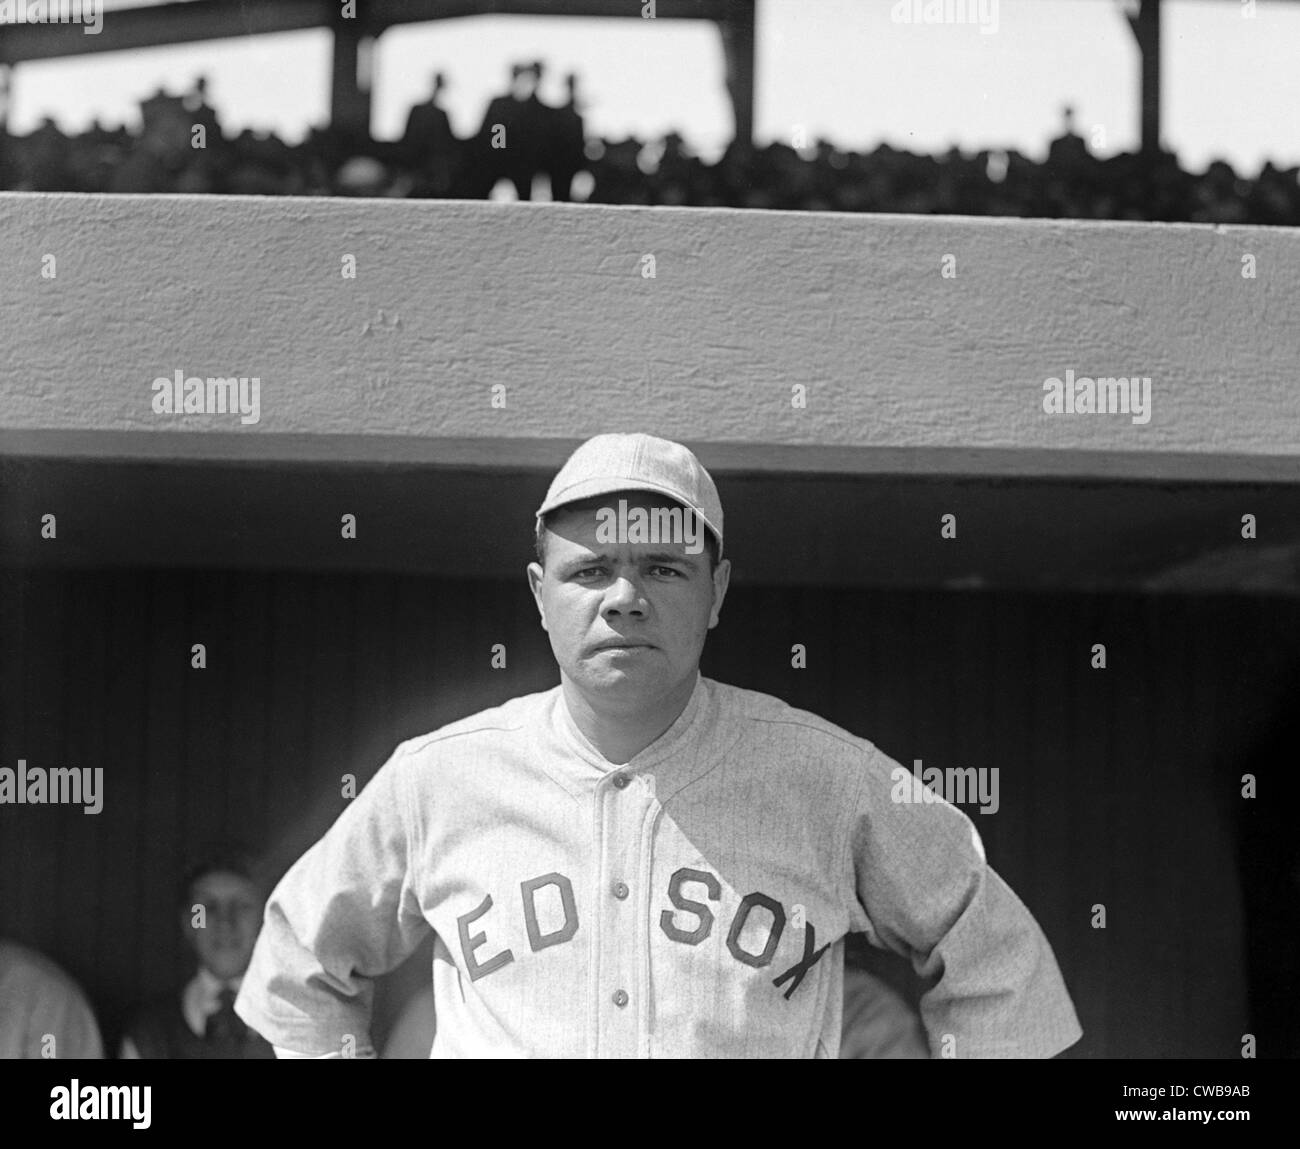 Babe Ruth, 1919 Foto Stock